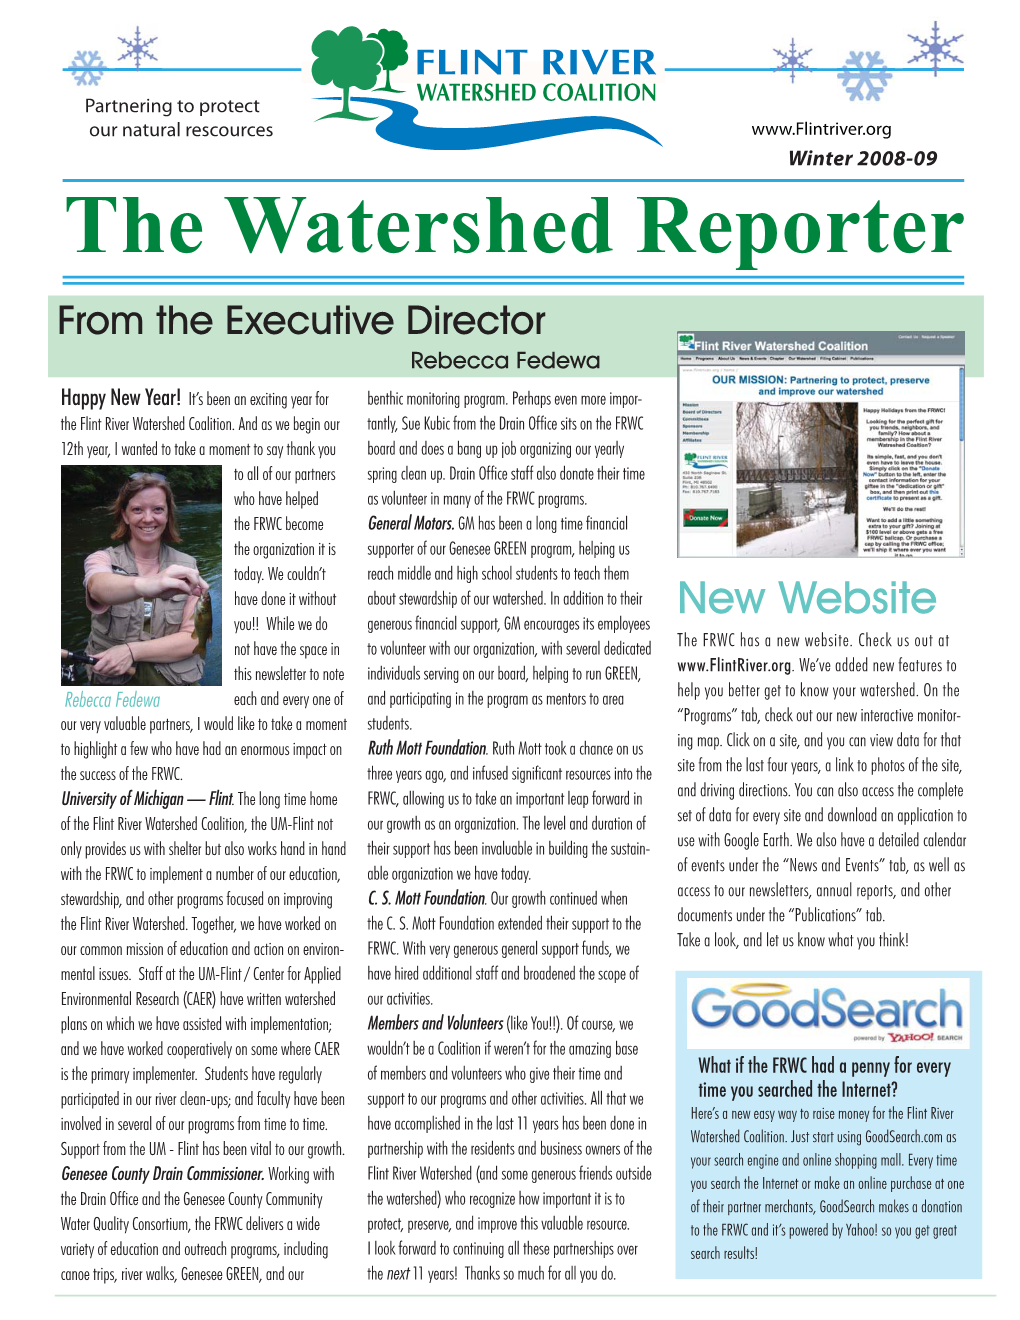 The Watershed Reporter from the Executive Director Rebecca Fedewa Happy New Year! It’S Been an Exciting Year for Benthic Monitoring Program